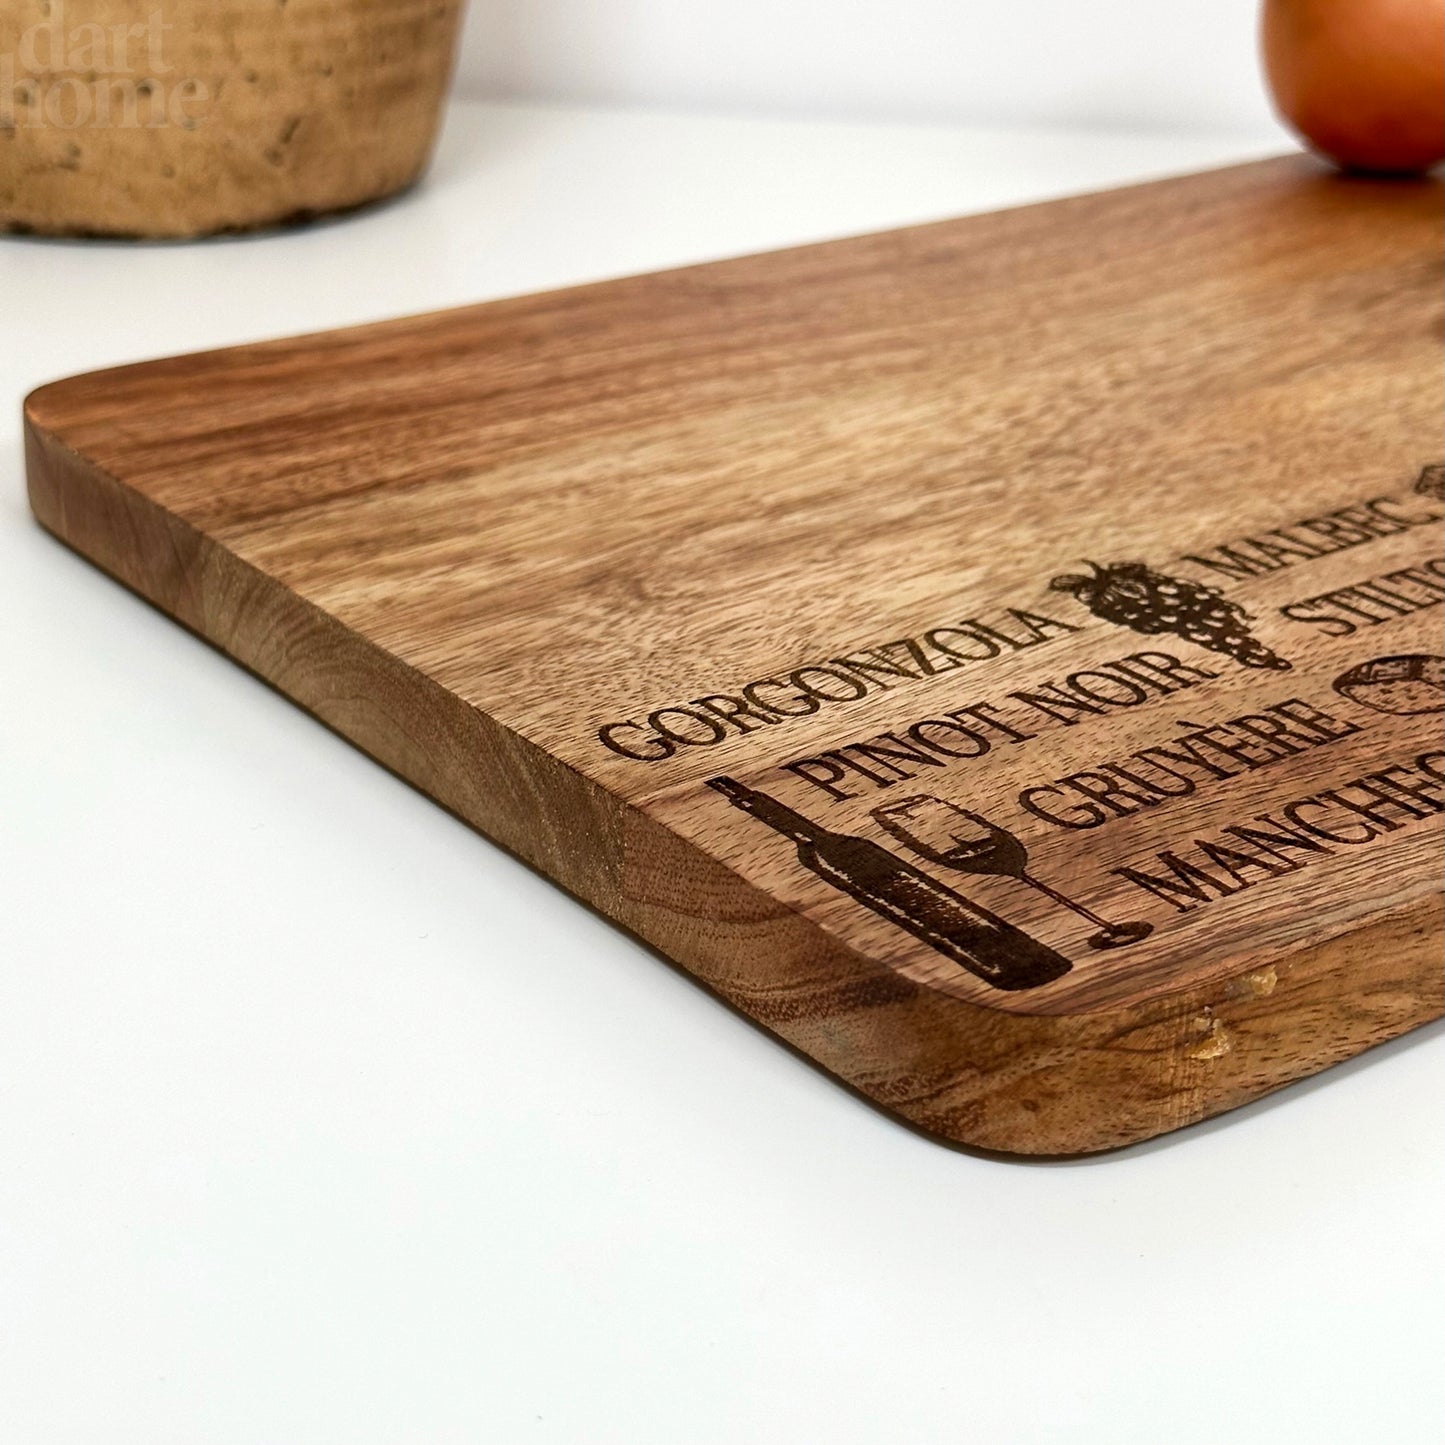 Etched Cheese & Wine Chopping Board A